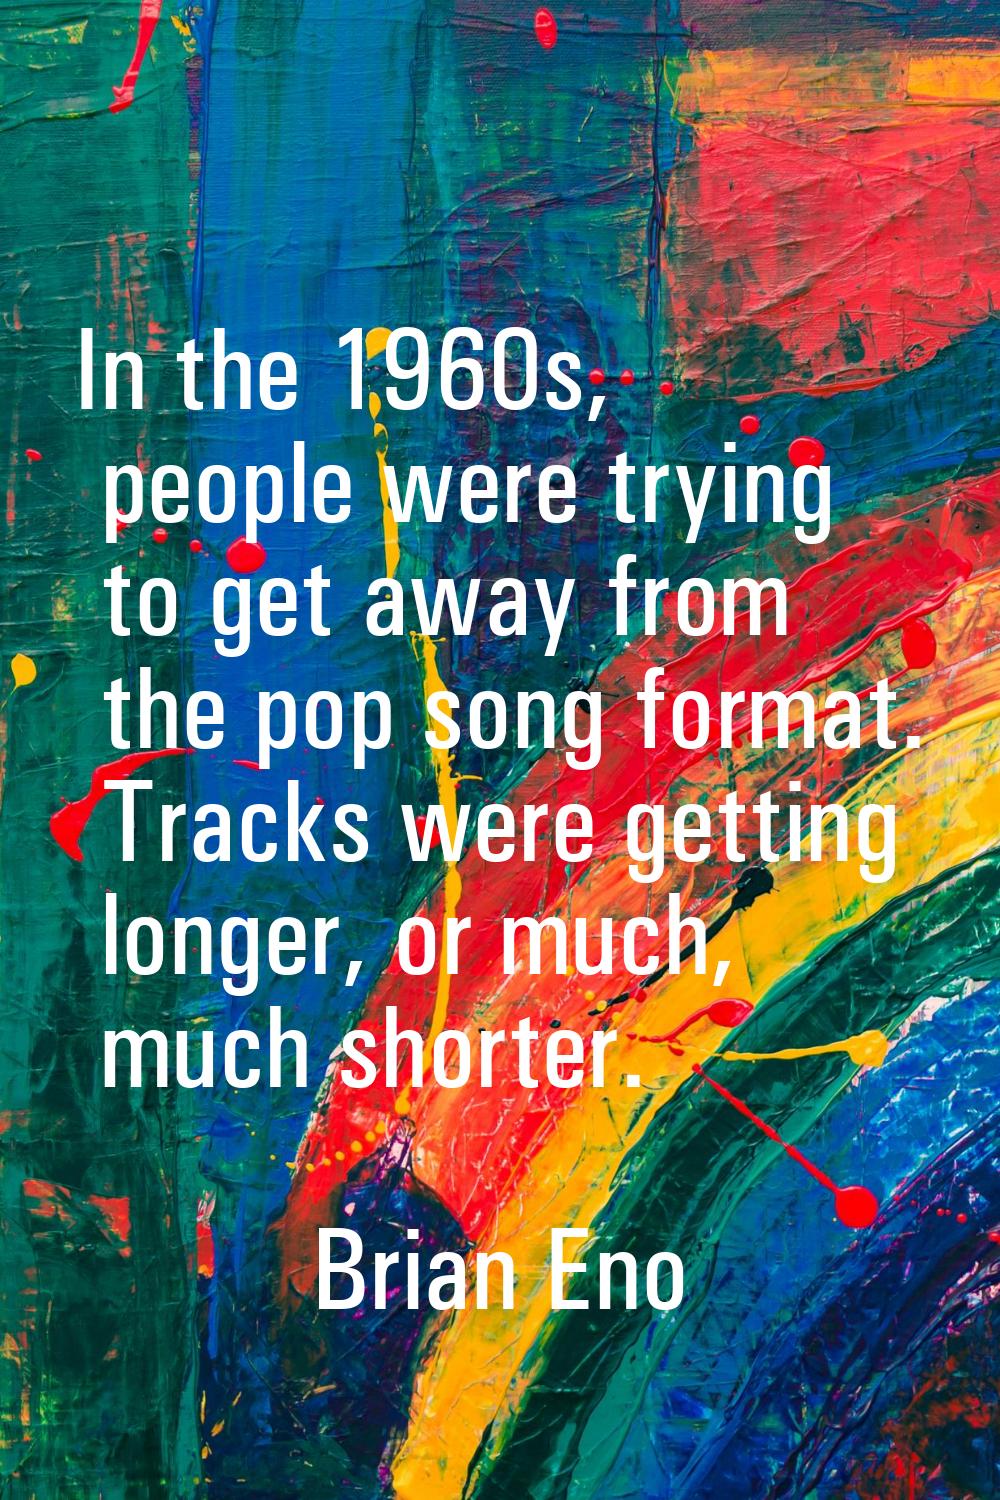 In the 1960s, people were trying to get away from the pop song format. Tracks were getting longer, 